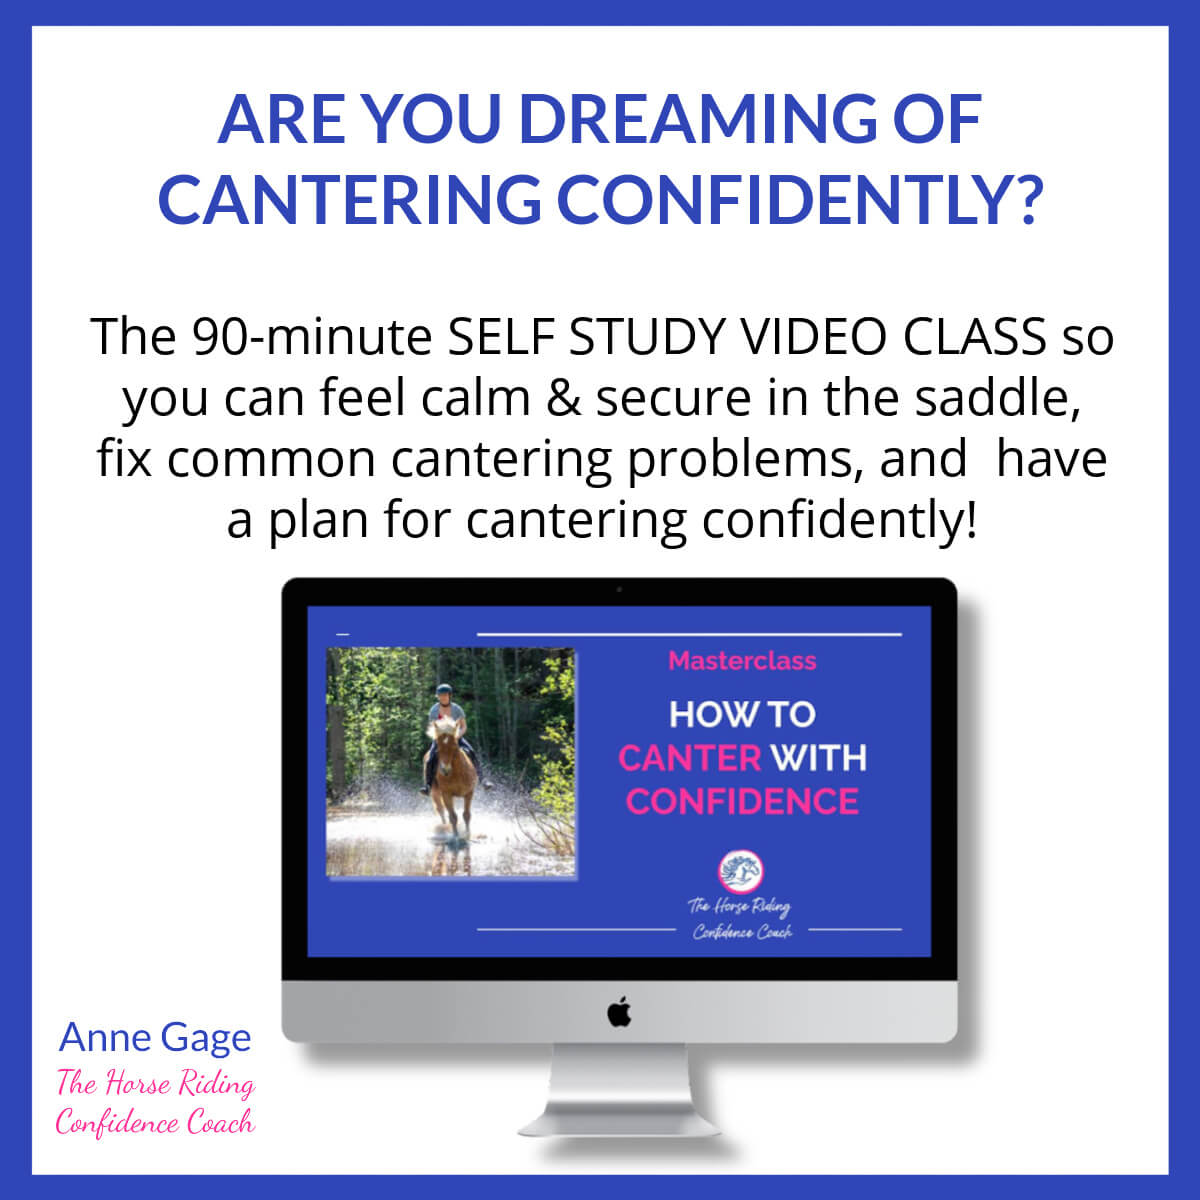 Are you dreaming of cantering confidently? This masterclass - How To Canter With Confidence - is for you.